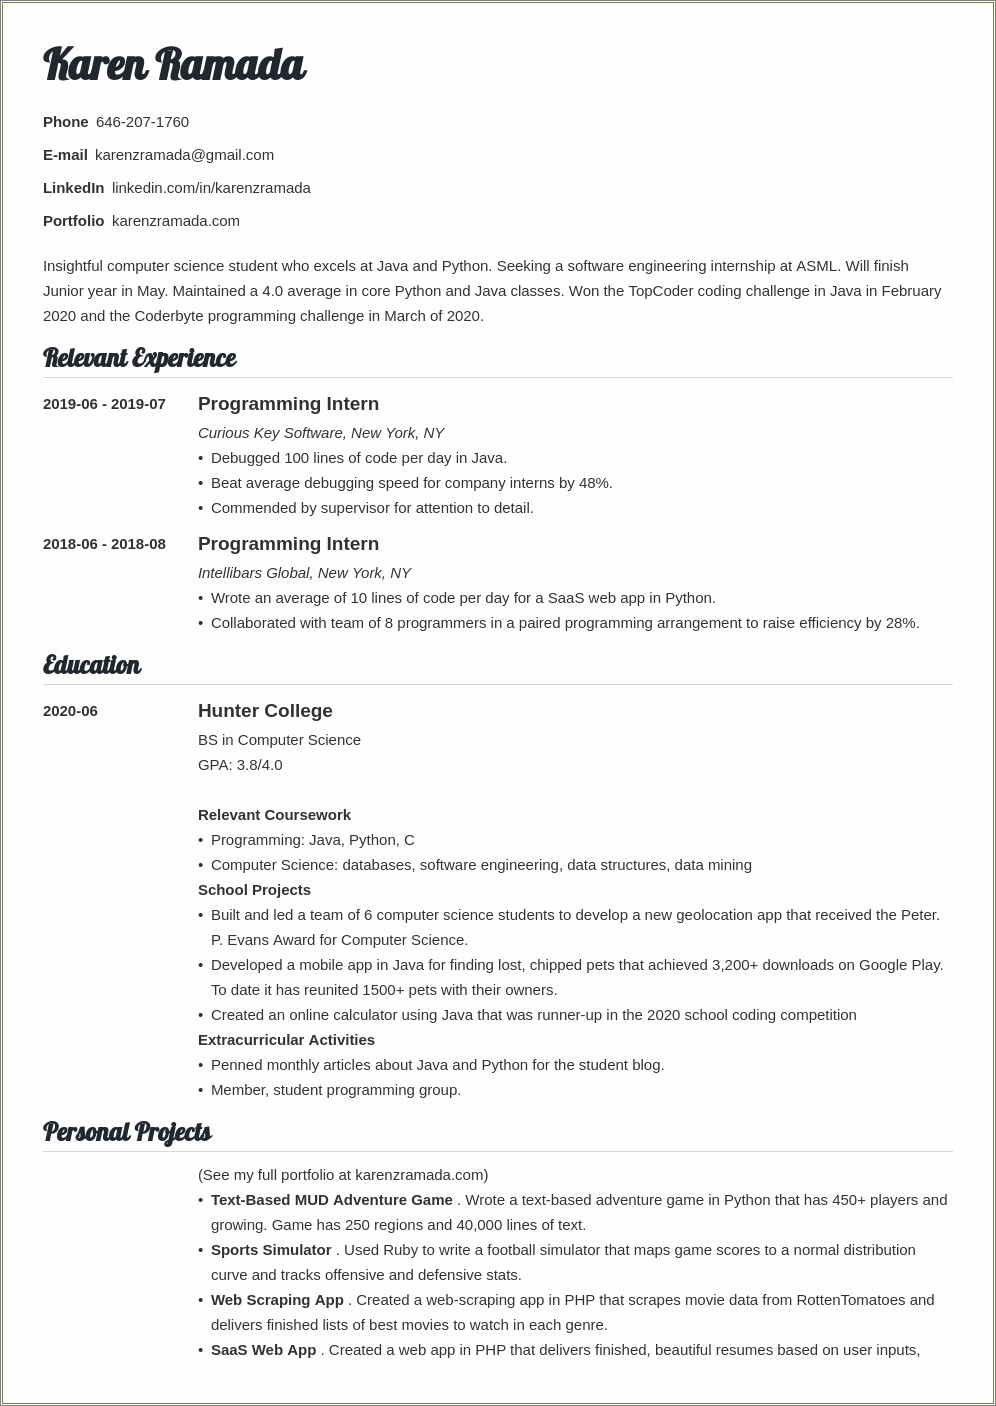 Resume Objective For Internship Computer Science